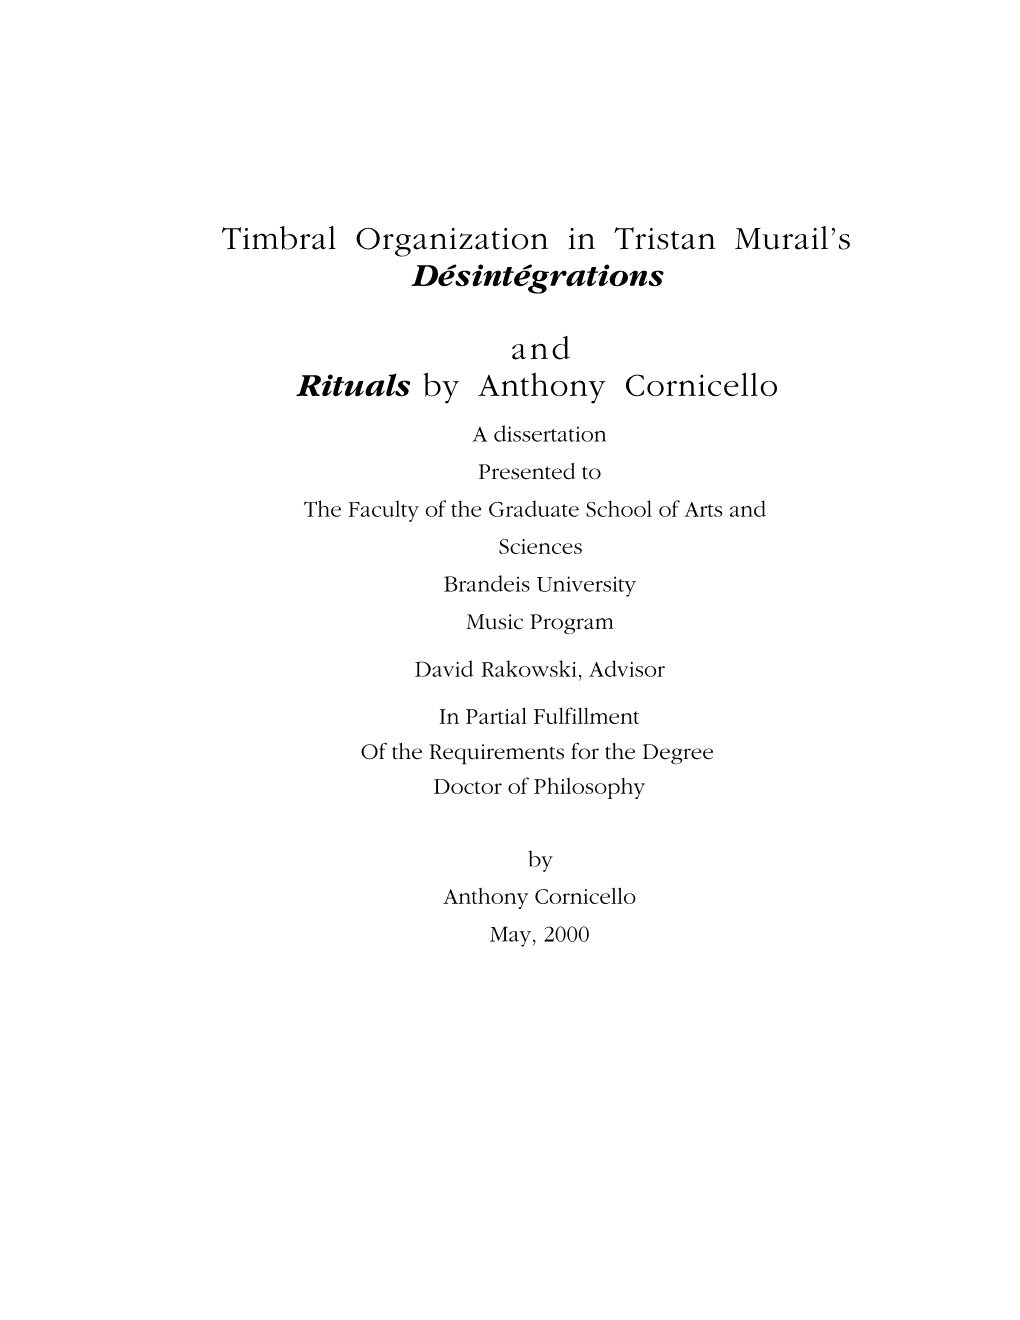 Timbral Organization in Tristan Murail's Désintégrations and Rituals by Anthony Cornicello